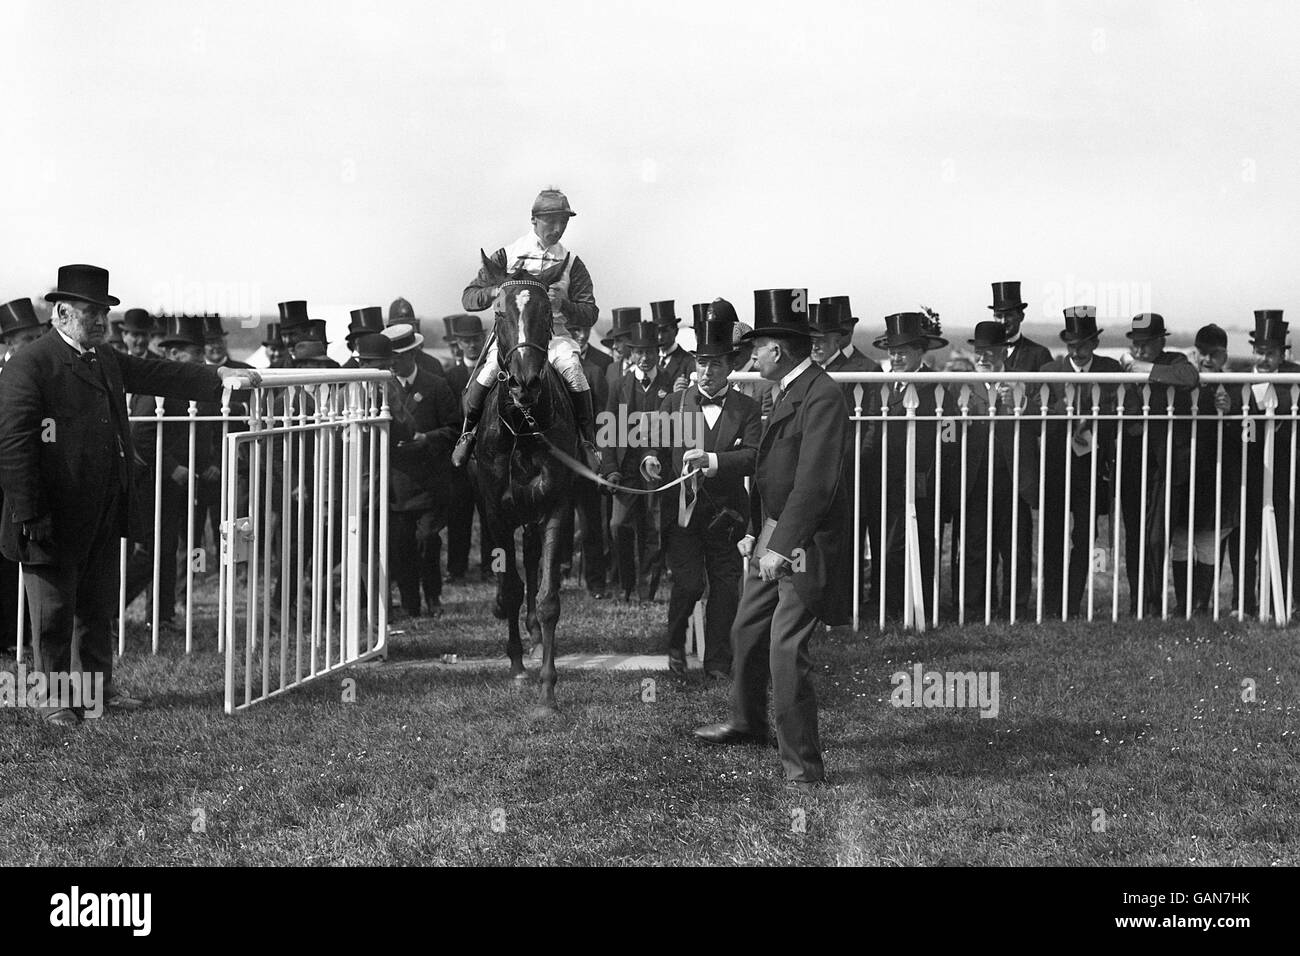 'Bayardo', with Danny Maher up, being led into the winners enclosure after winning the Gold Cup by four lengths. Stock Photo